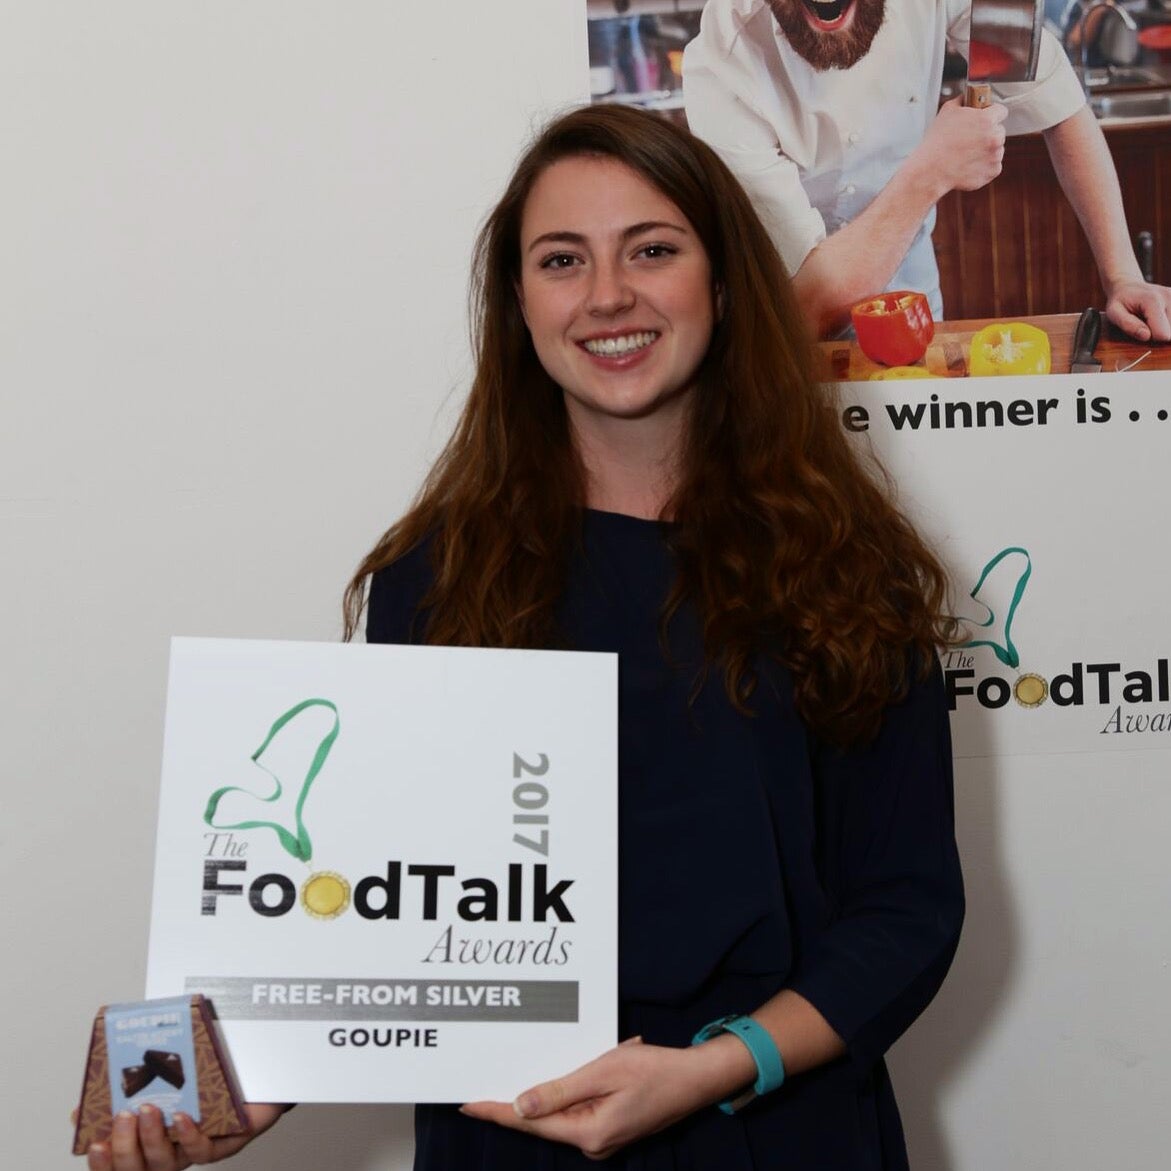 Goupie manager Grace Simpson holding her Foodtalk Awards certificate.